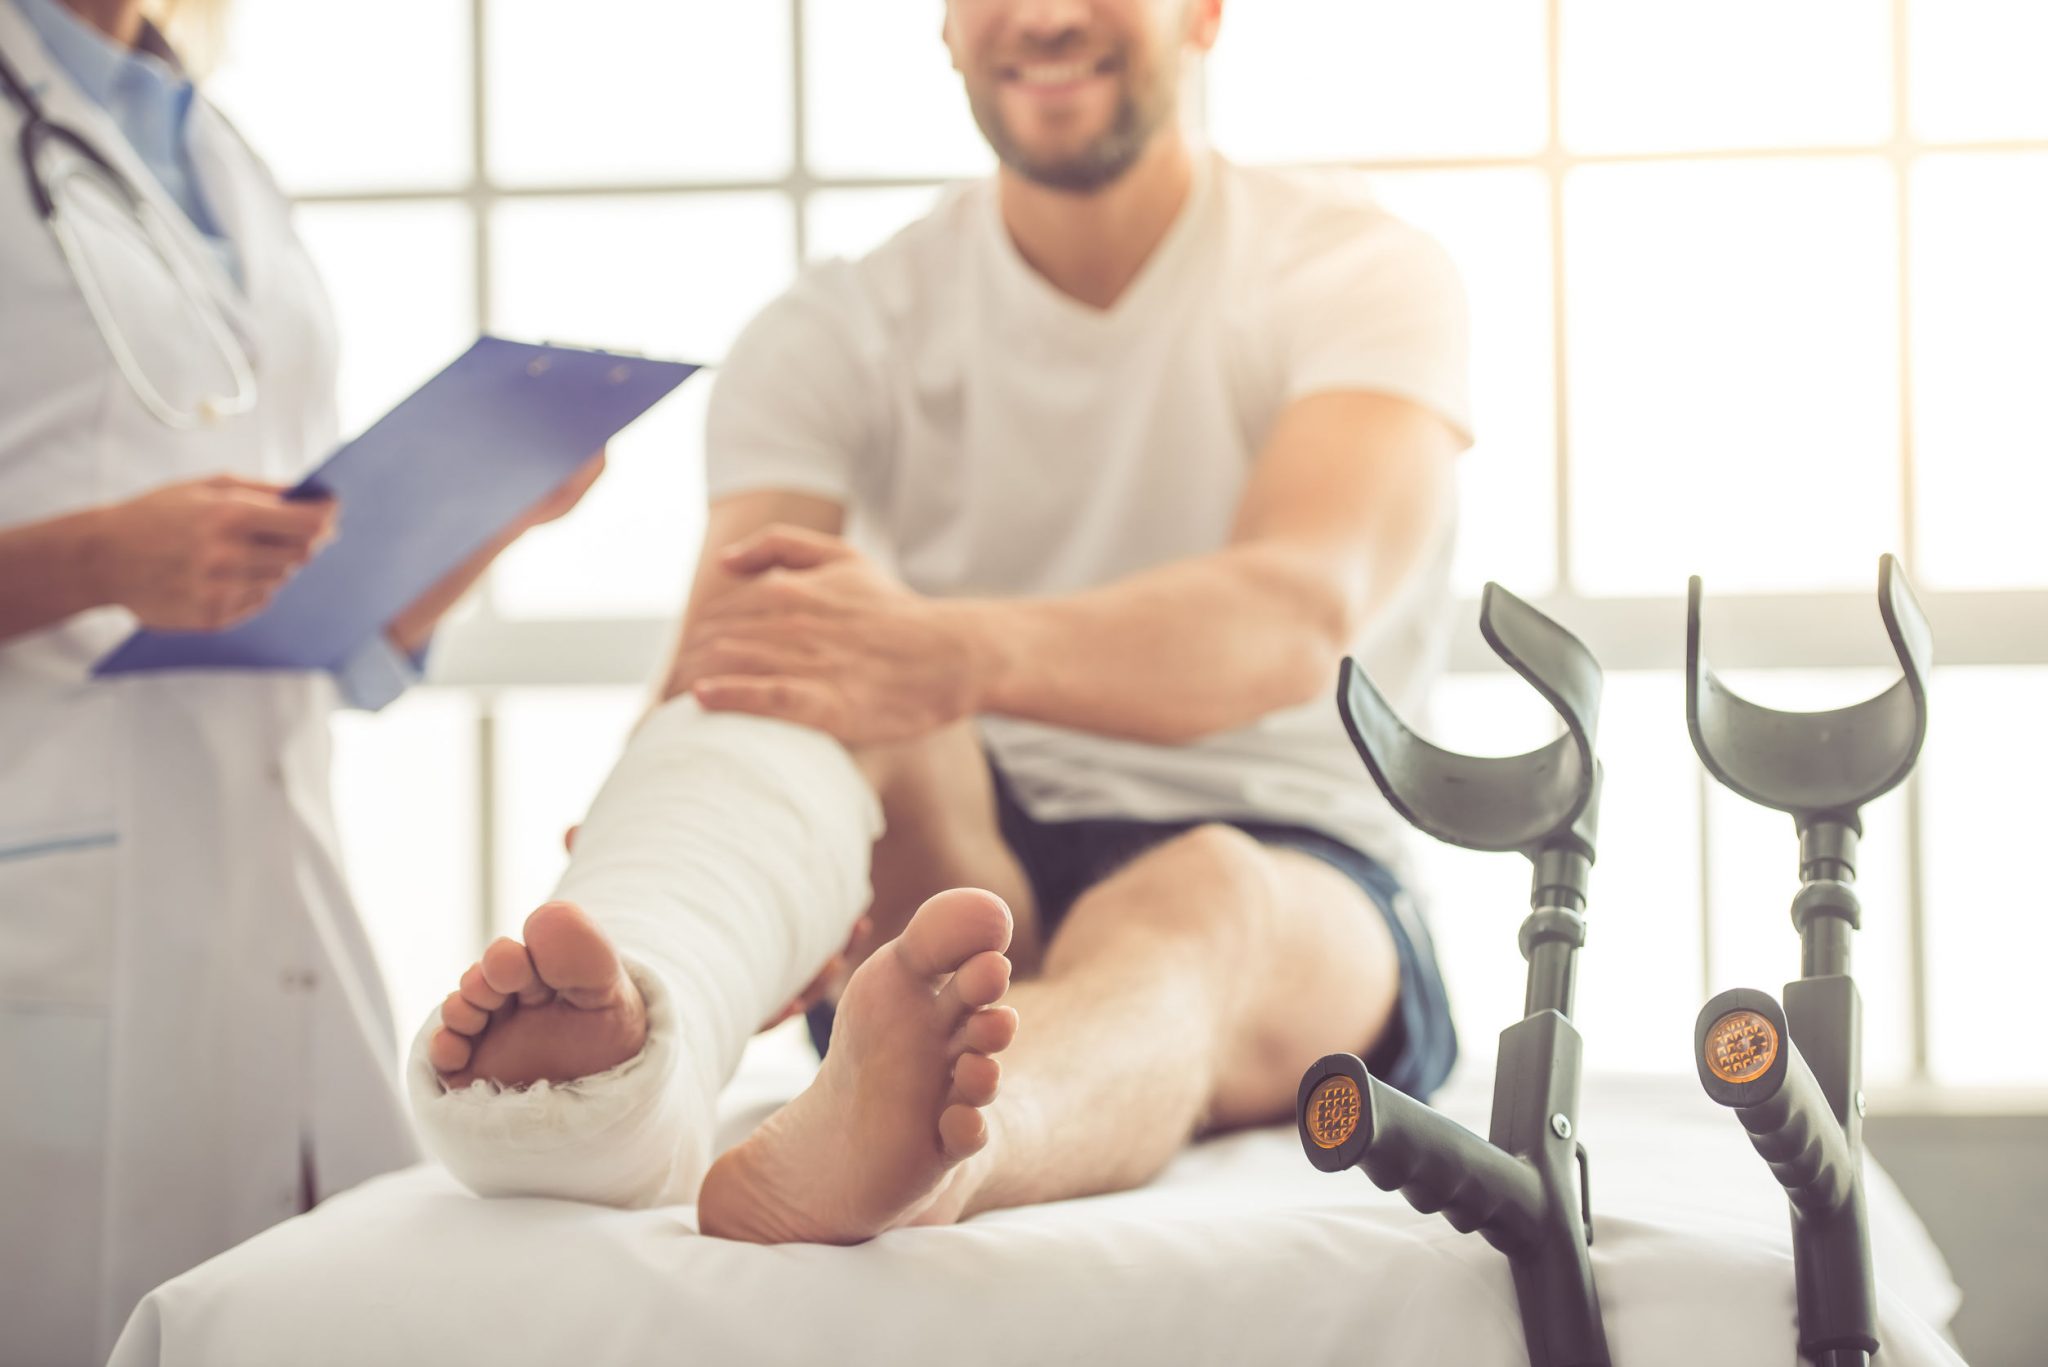 If you’ve been injured in an accident, you may have a personal injury case.